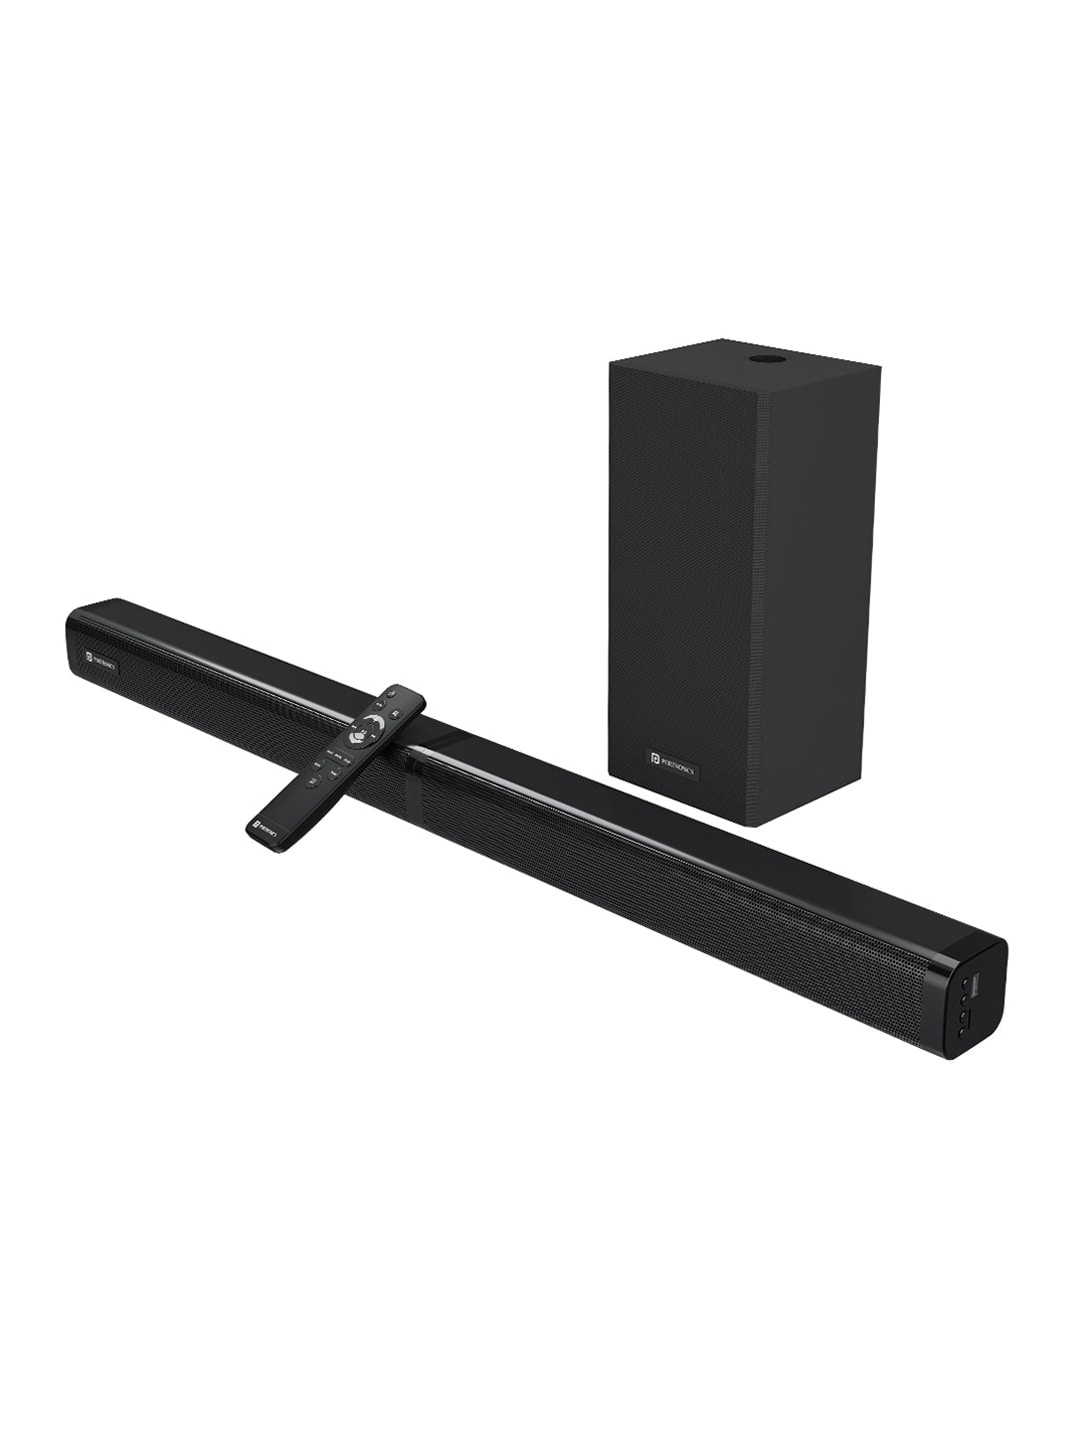 Portronics  Black  Pure Sound 103 Soundbar with Wired Woofer Price in India